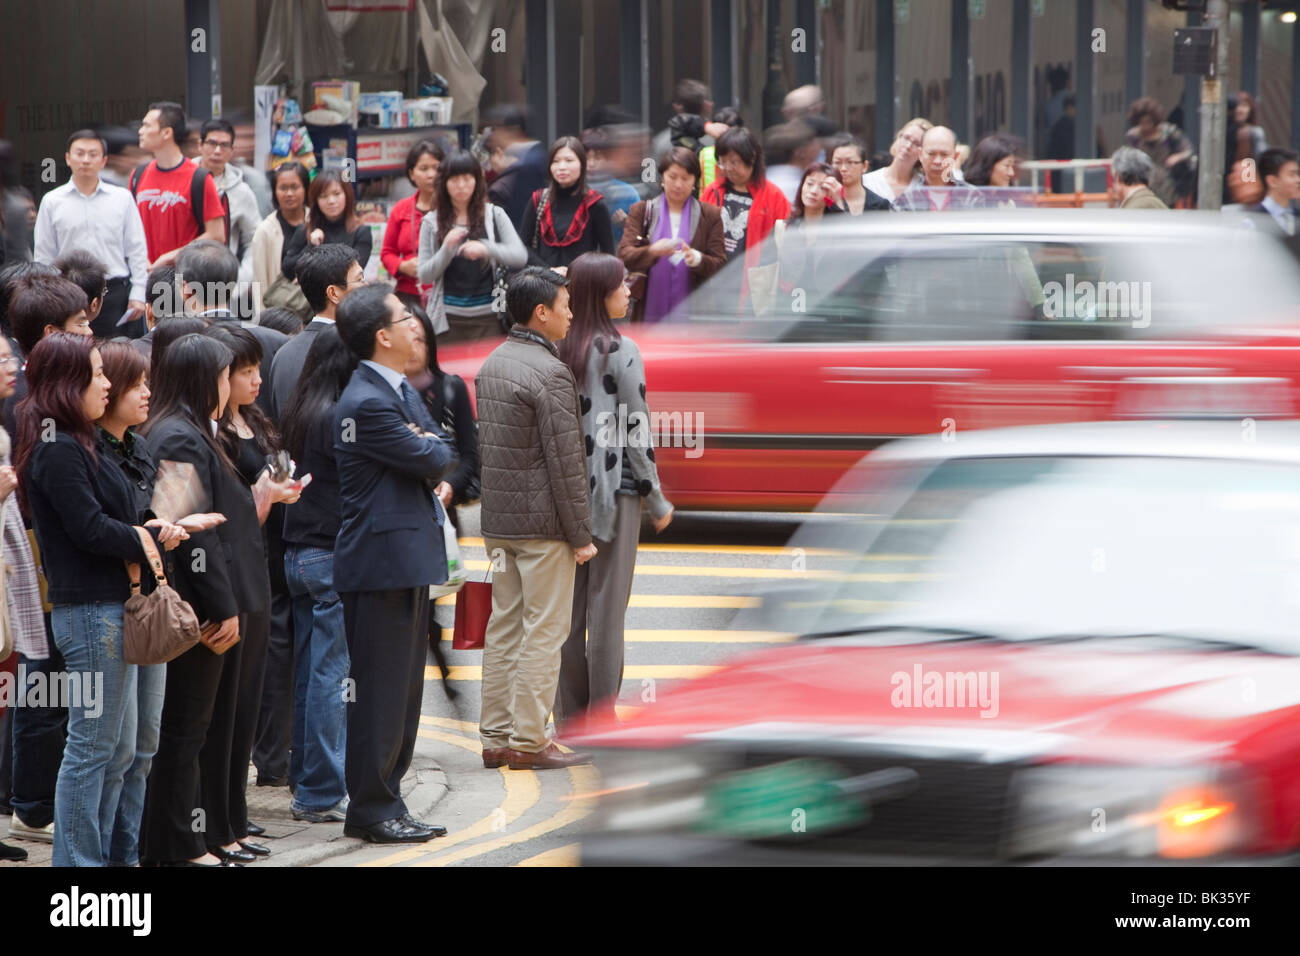 Crowds of people on the street in Hong Kong, China. Stock Photo